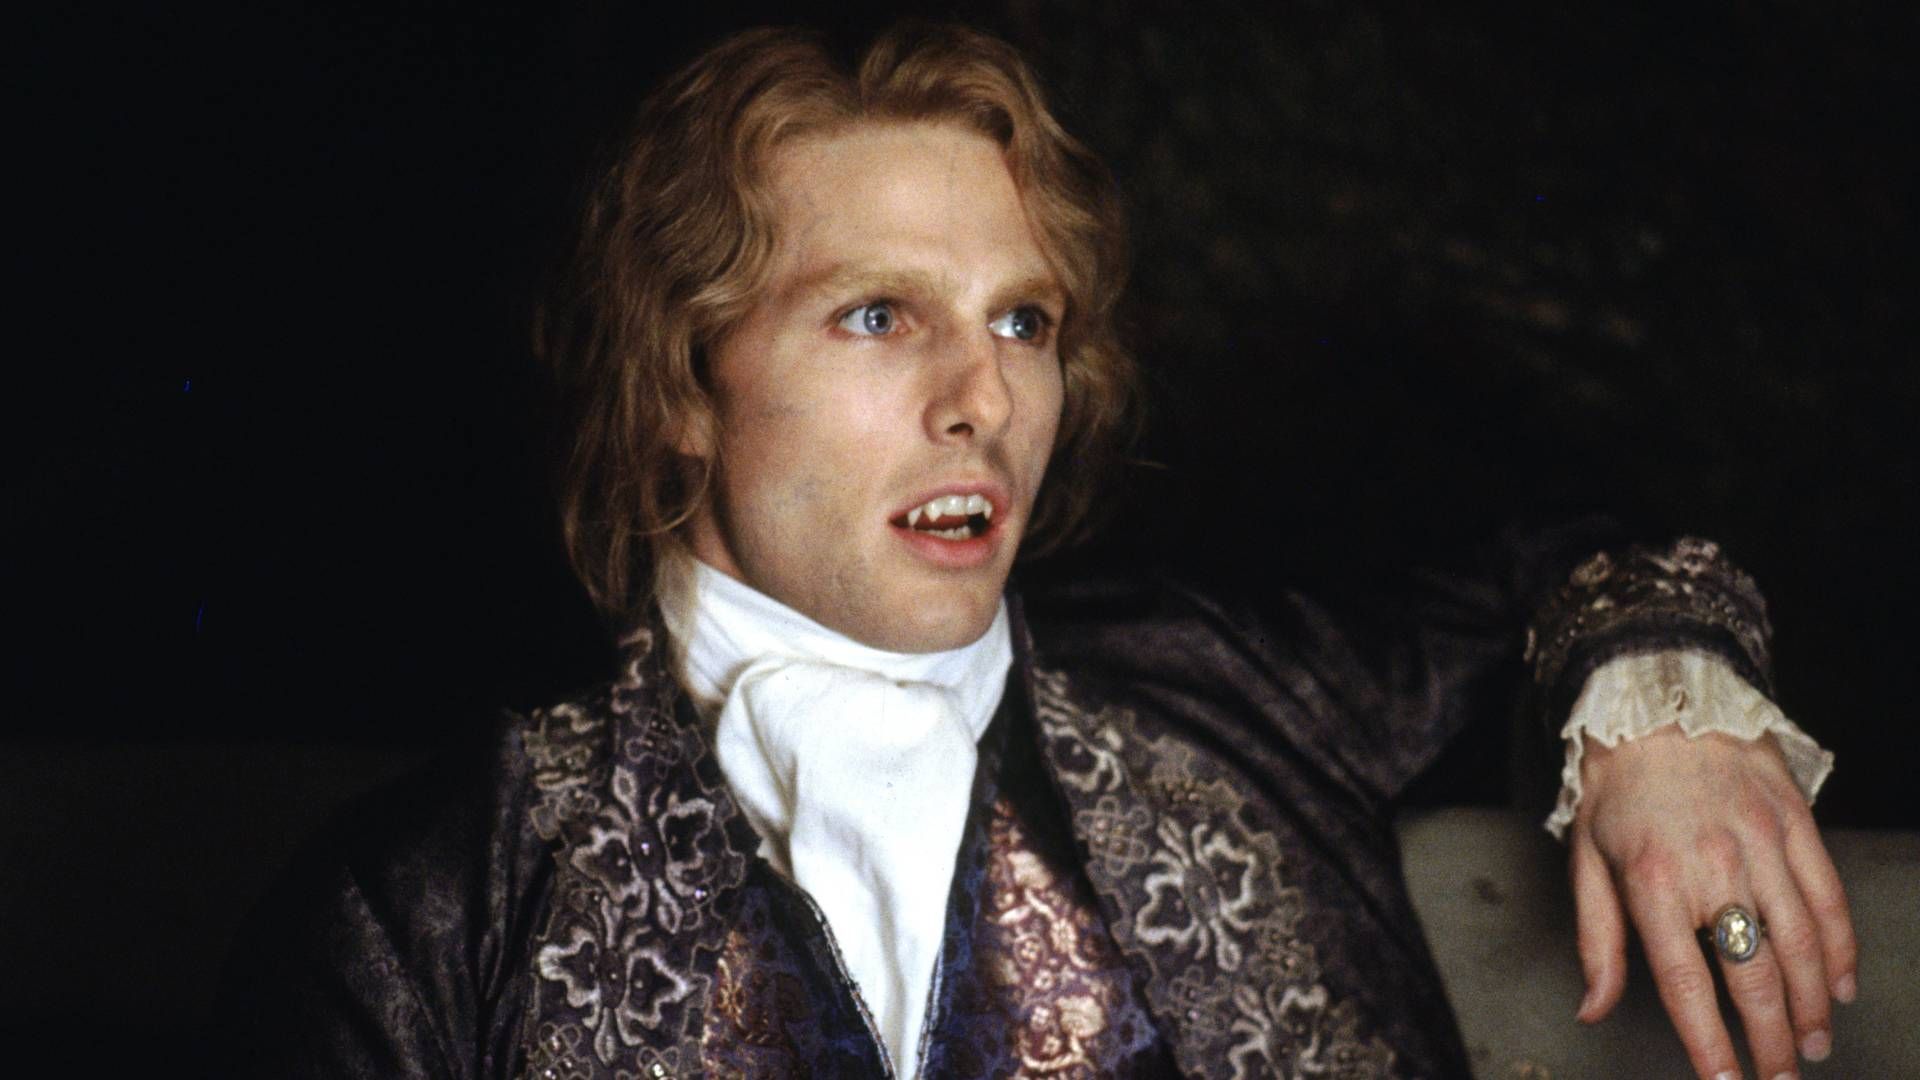 <p>                     "I assume I need no introduction," Tom Cruise’s vampire Lestat drawls in the final scene of Anne Rice adaptation, Interview With The Vampire. Subduing Christian Slater’s reporter before he can release Louis’ story to the world, this is the first time we meet the louche Lestat and he certainly makes his (fang-shaped) mark. The ending is the perfect twist to the chilling drama directed by Neil Jordan, and Cruise nails his character’s menace right up to the credits crawl. It’s the small details that sell it too, from Lestat’s straightening of his shirt sleeves as he takes the wheel to his cackle as the needle drops to The Rolling Stones’ "Sympathy for the Devil." It marks a fitting curtain call to one of Cruise’s most iconic characters.                   </p>